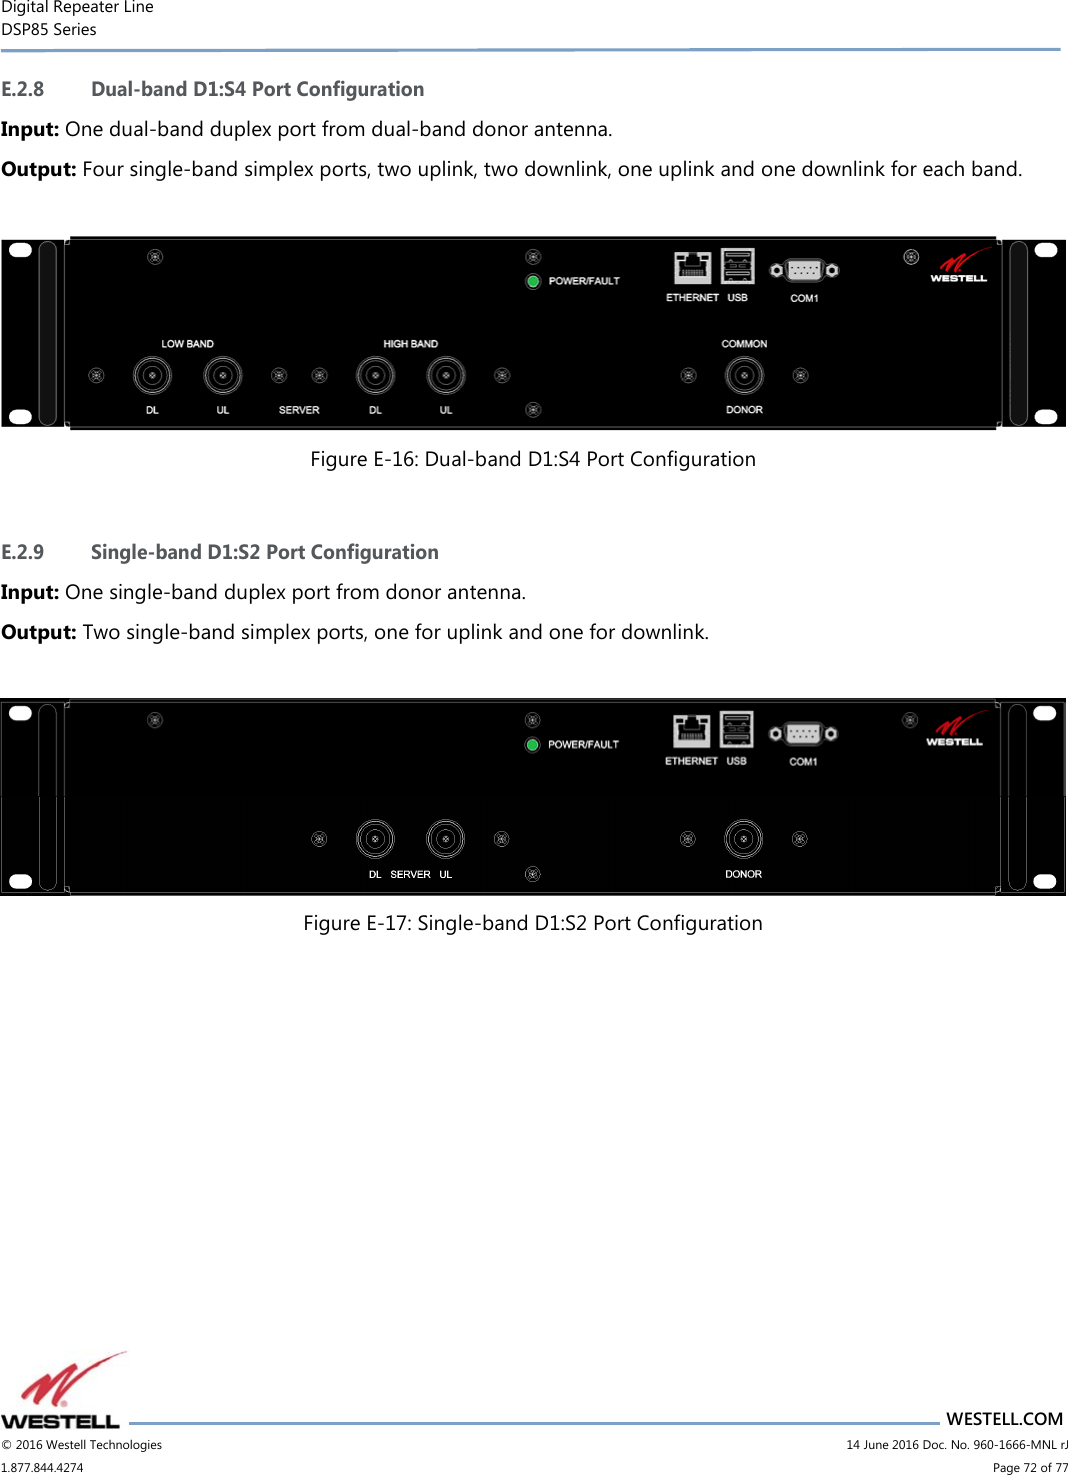 Digital Repeater Line DSP85 Series                       WESTELL.COM © 2016 Westell Technologies                         14 June 2016 Doc. No. 960-1666-MNL rJ 1.877.844.4274                             Page 72 of 77  E.2.8 Dual-band D1:S4 Port Configuration Input: One dual-band duplex port from dual-band donor antenna. Output: Four single-band simplex ports, two uplink, two downlink, one uplink and one downlink for each band.   Figure E-16: Dual-band D1:S4 Port Configuration  E.2.9 Single-band D1:S2 Port Configuration Input: One single-band duplex port from donor antenna. Output: Two single-band simplex ports, one for uplink and one for downlink.   Figure E-17: Single-band D1:S2 Port Configuration     